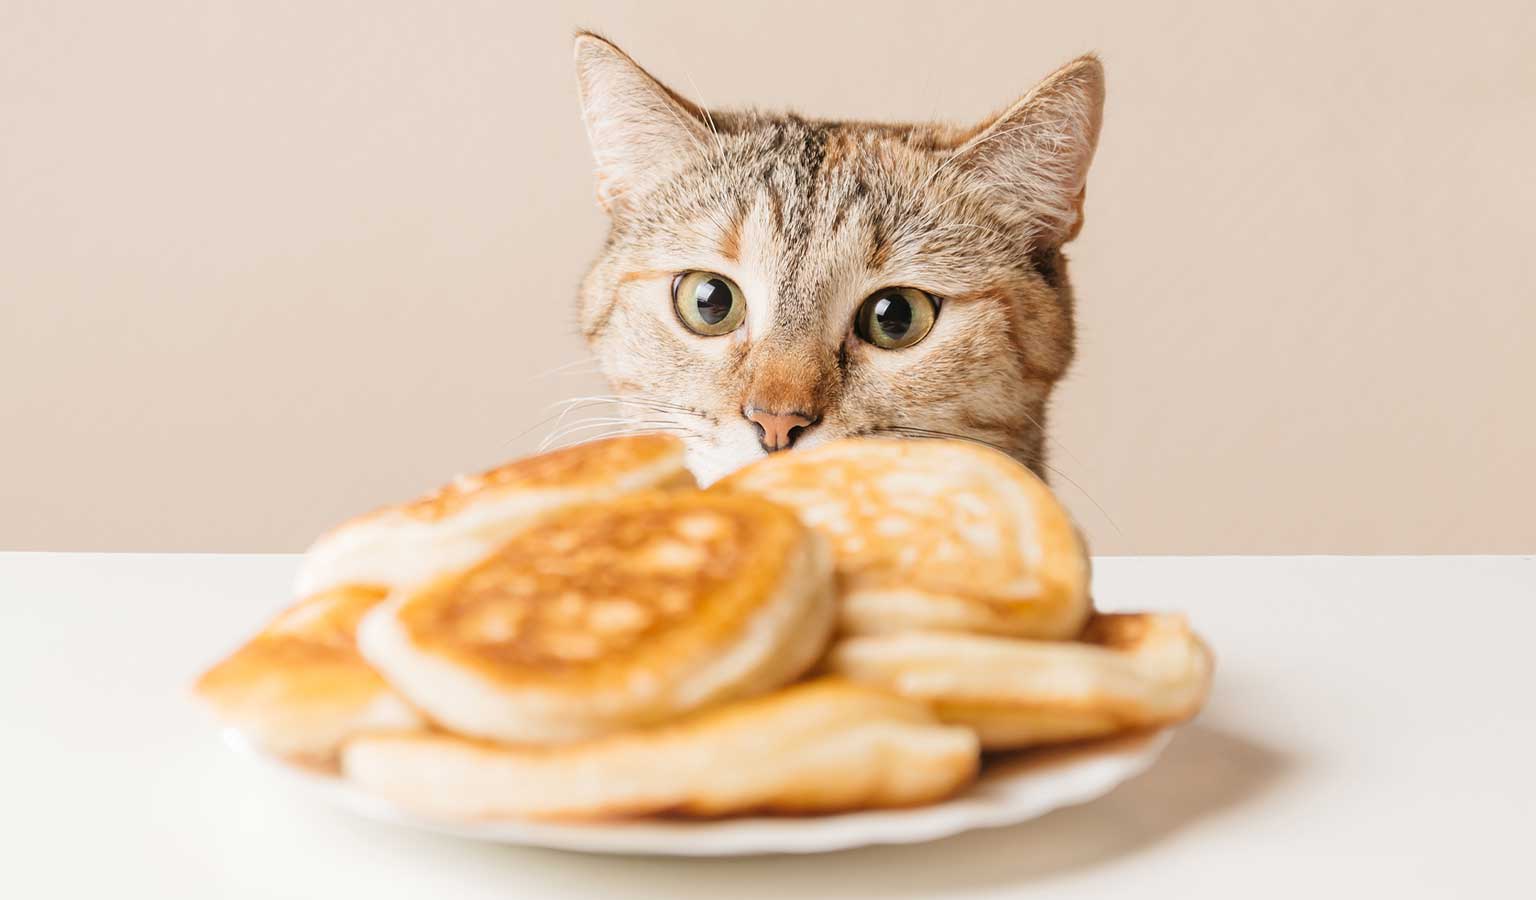 Human food that is dangerous for cats